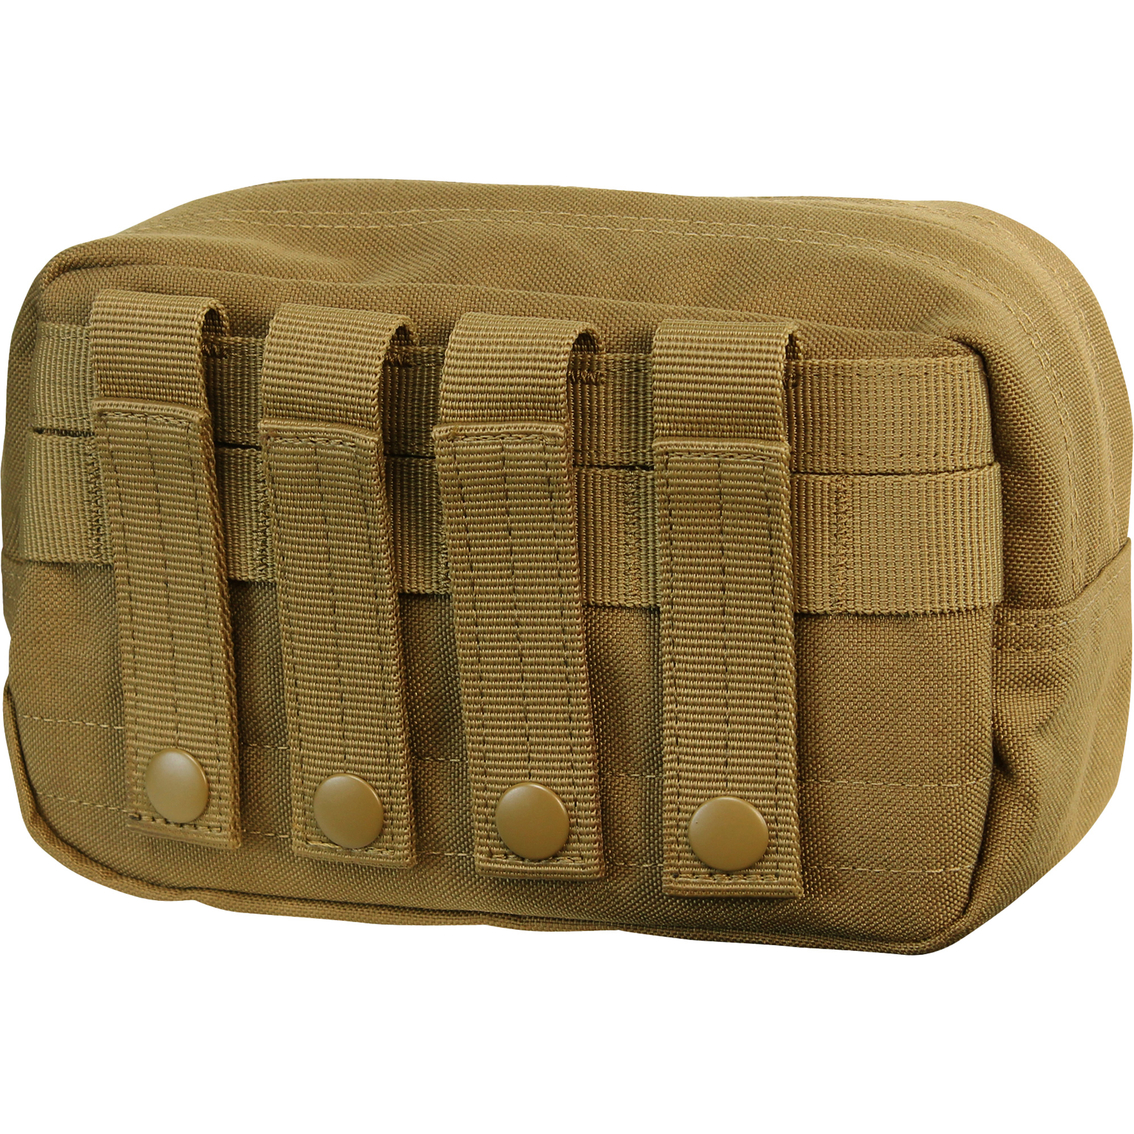 Condor Ma8 MOLLE Pals Utility Accessory Tool Pouch Black for sale online 